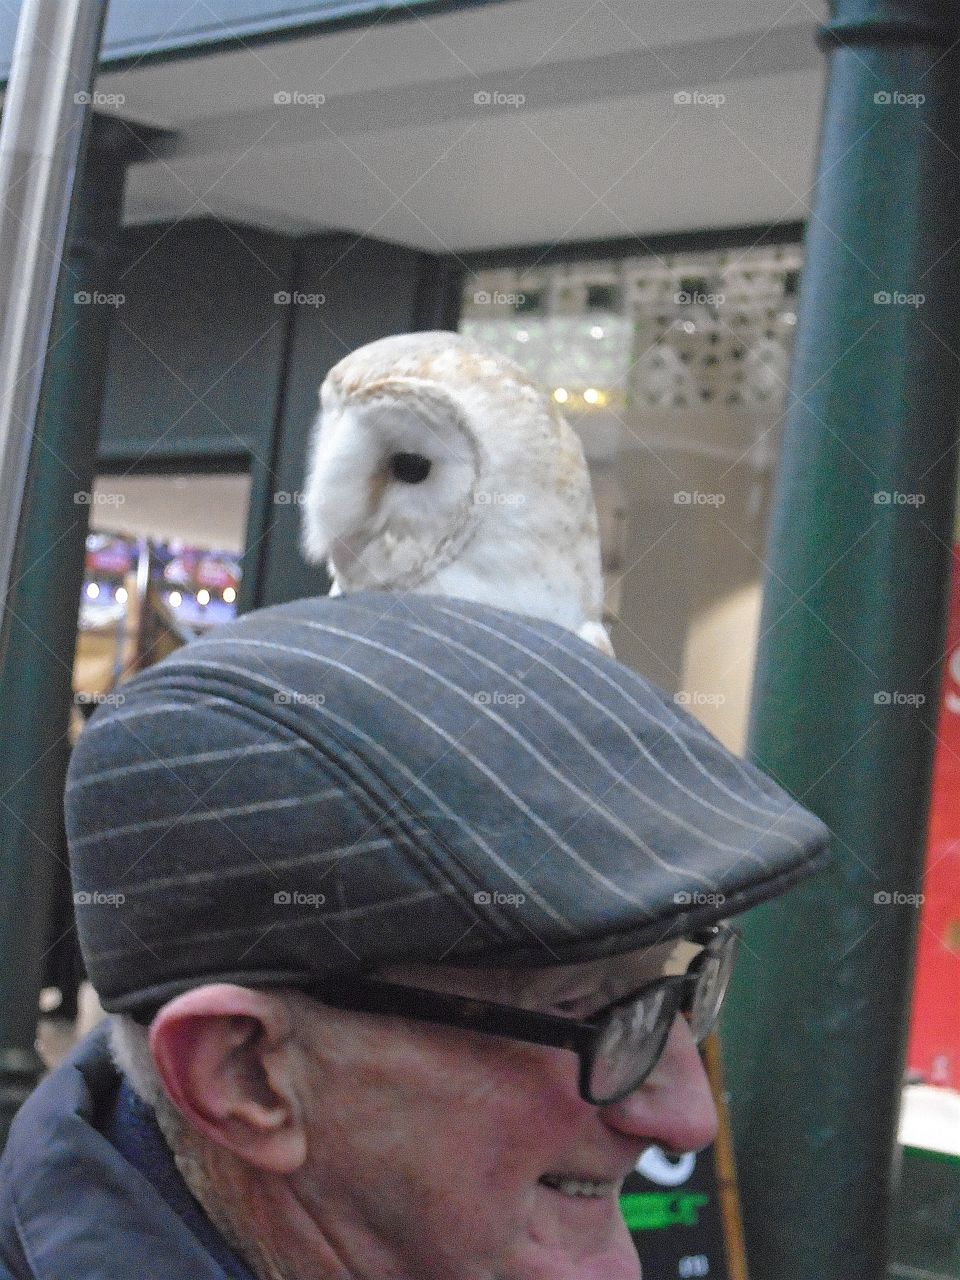 this very kind guy let me take a picture of him with is pet owl